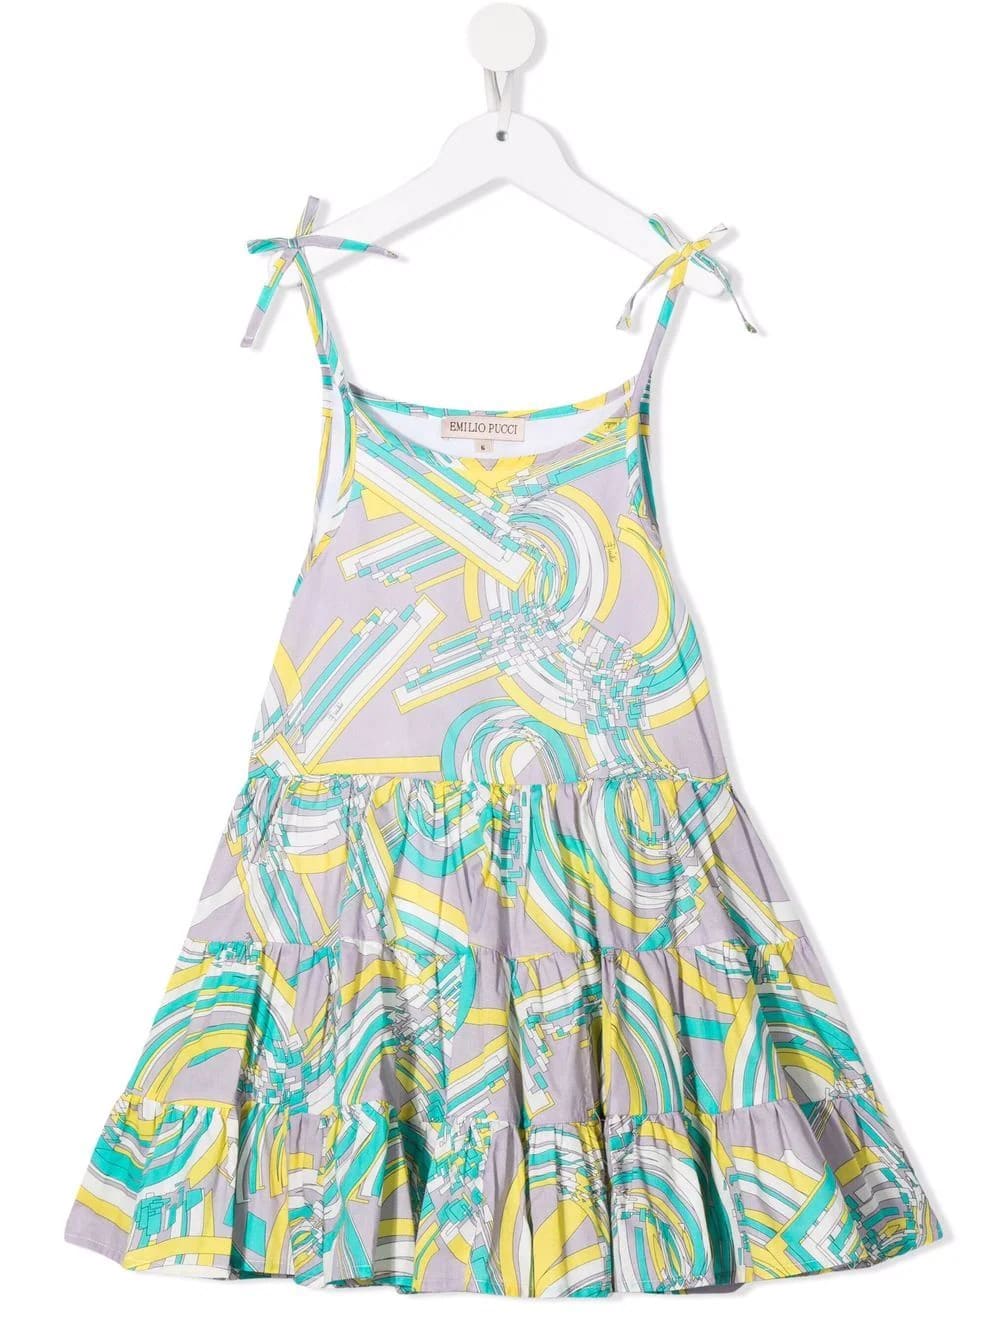 Emilio Pucci Kids Lilac Sleeveless Dress With Yellow And Aqua Green All-over Graphic Print